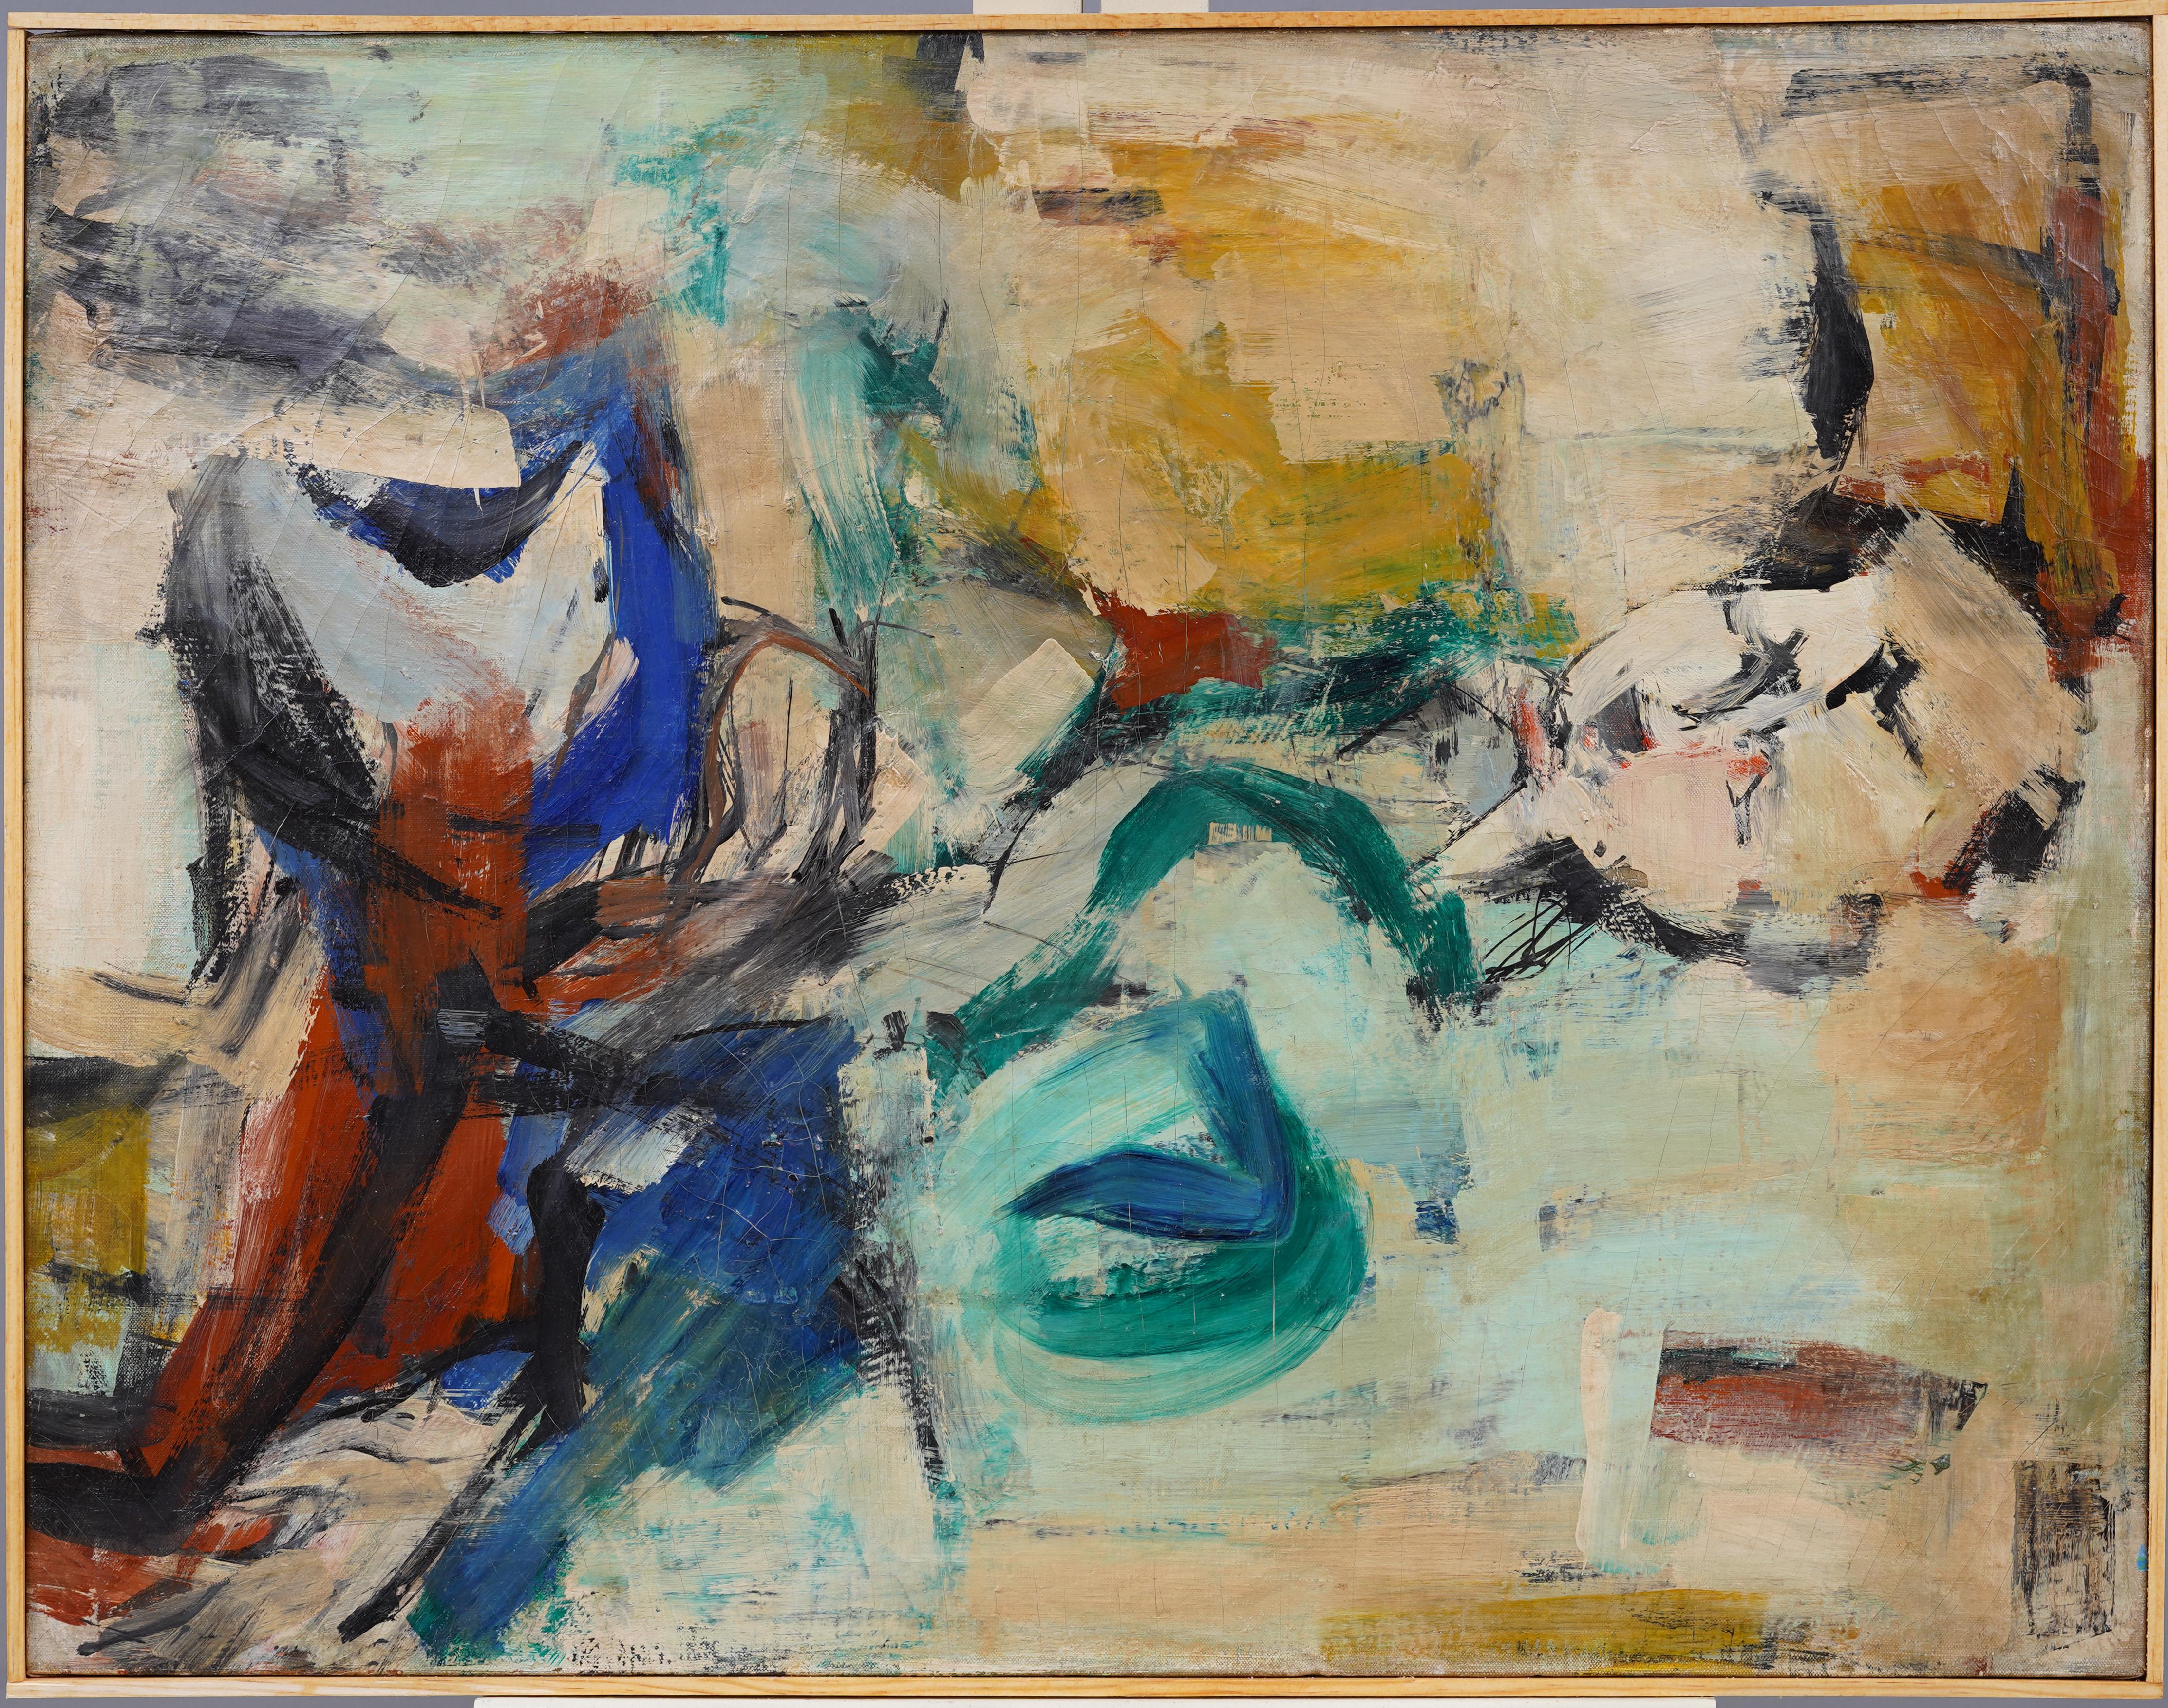 Very impressive and amazing mid 1900s abstract expressionist oil painting.  Oil on canvas.  No signature found.  Framed.  